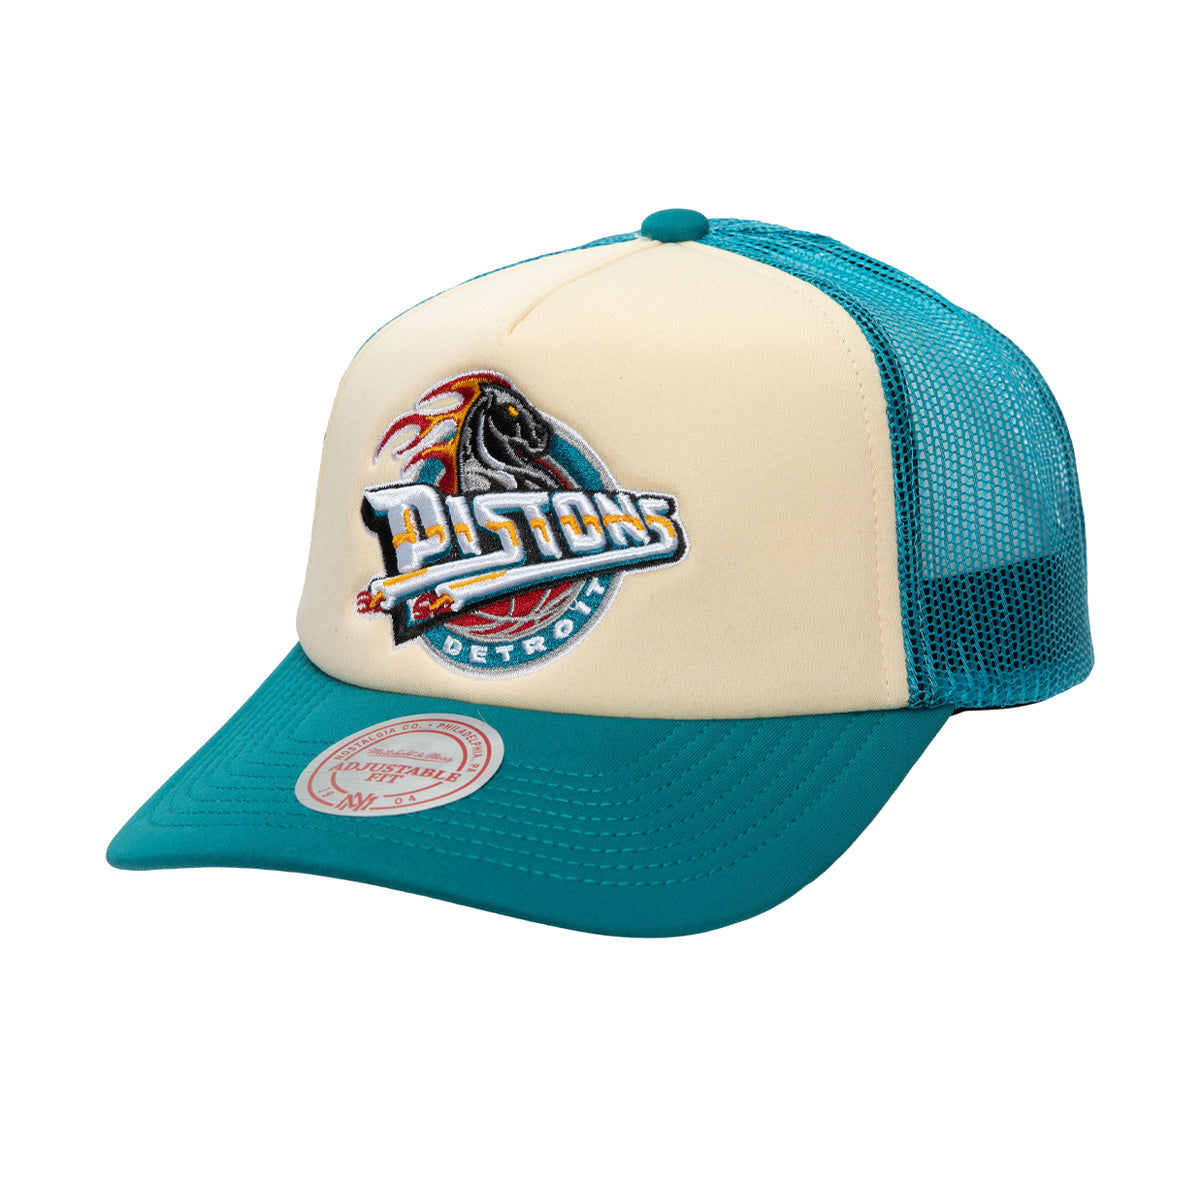 detroit pistons mitchell and ness hat